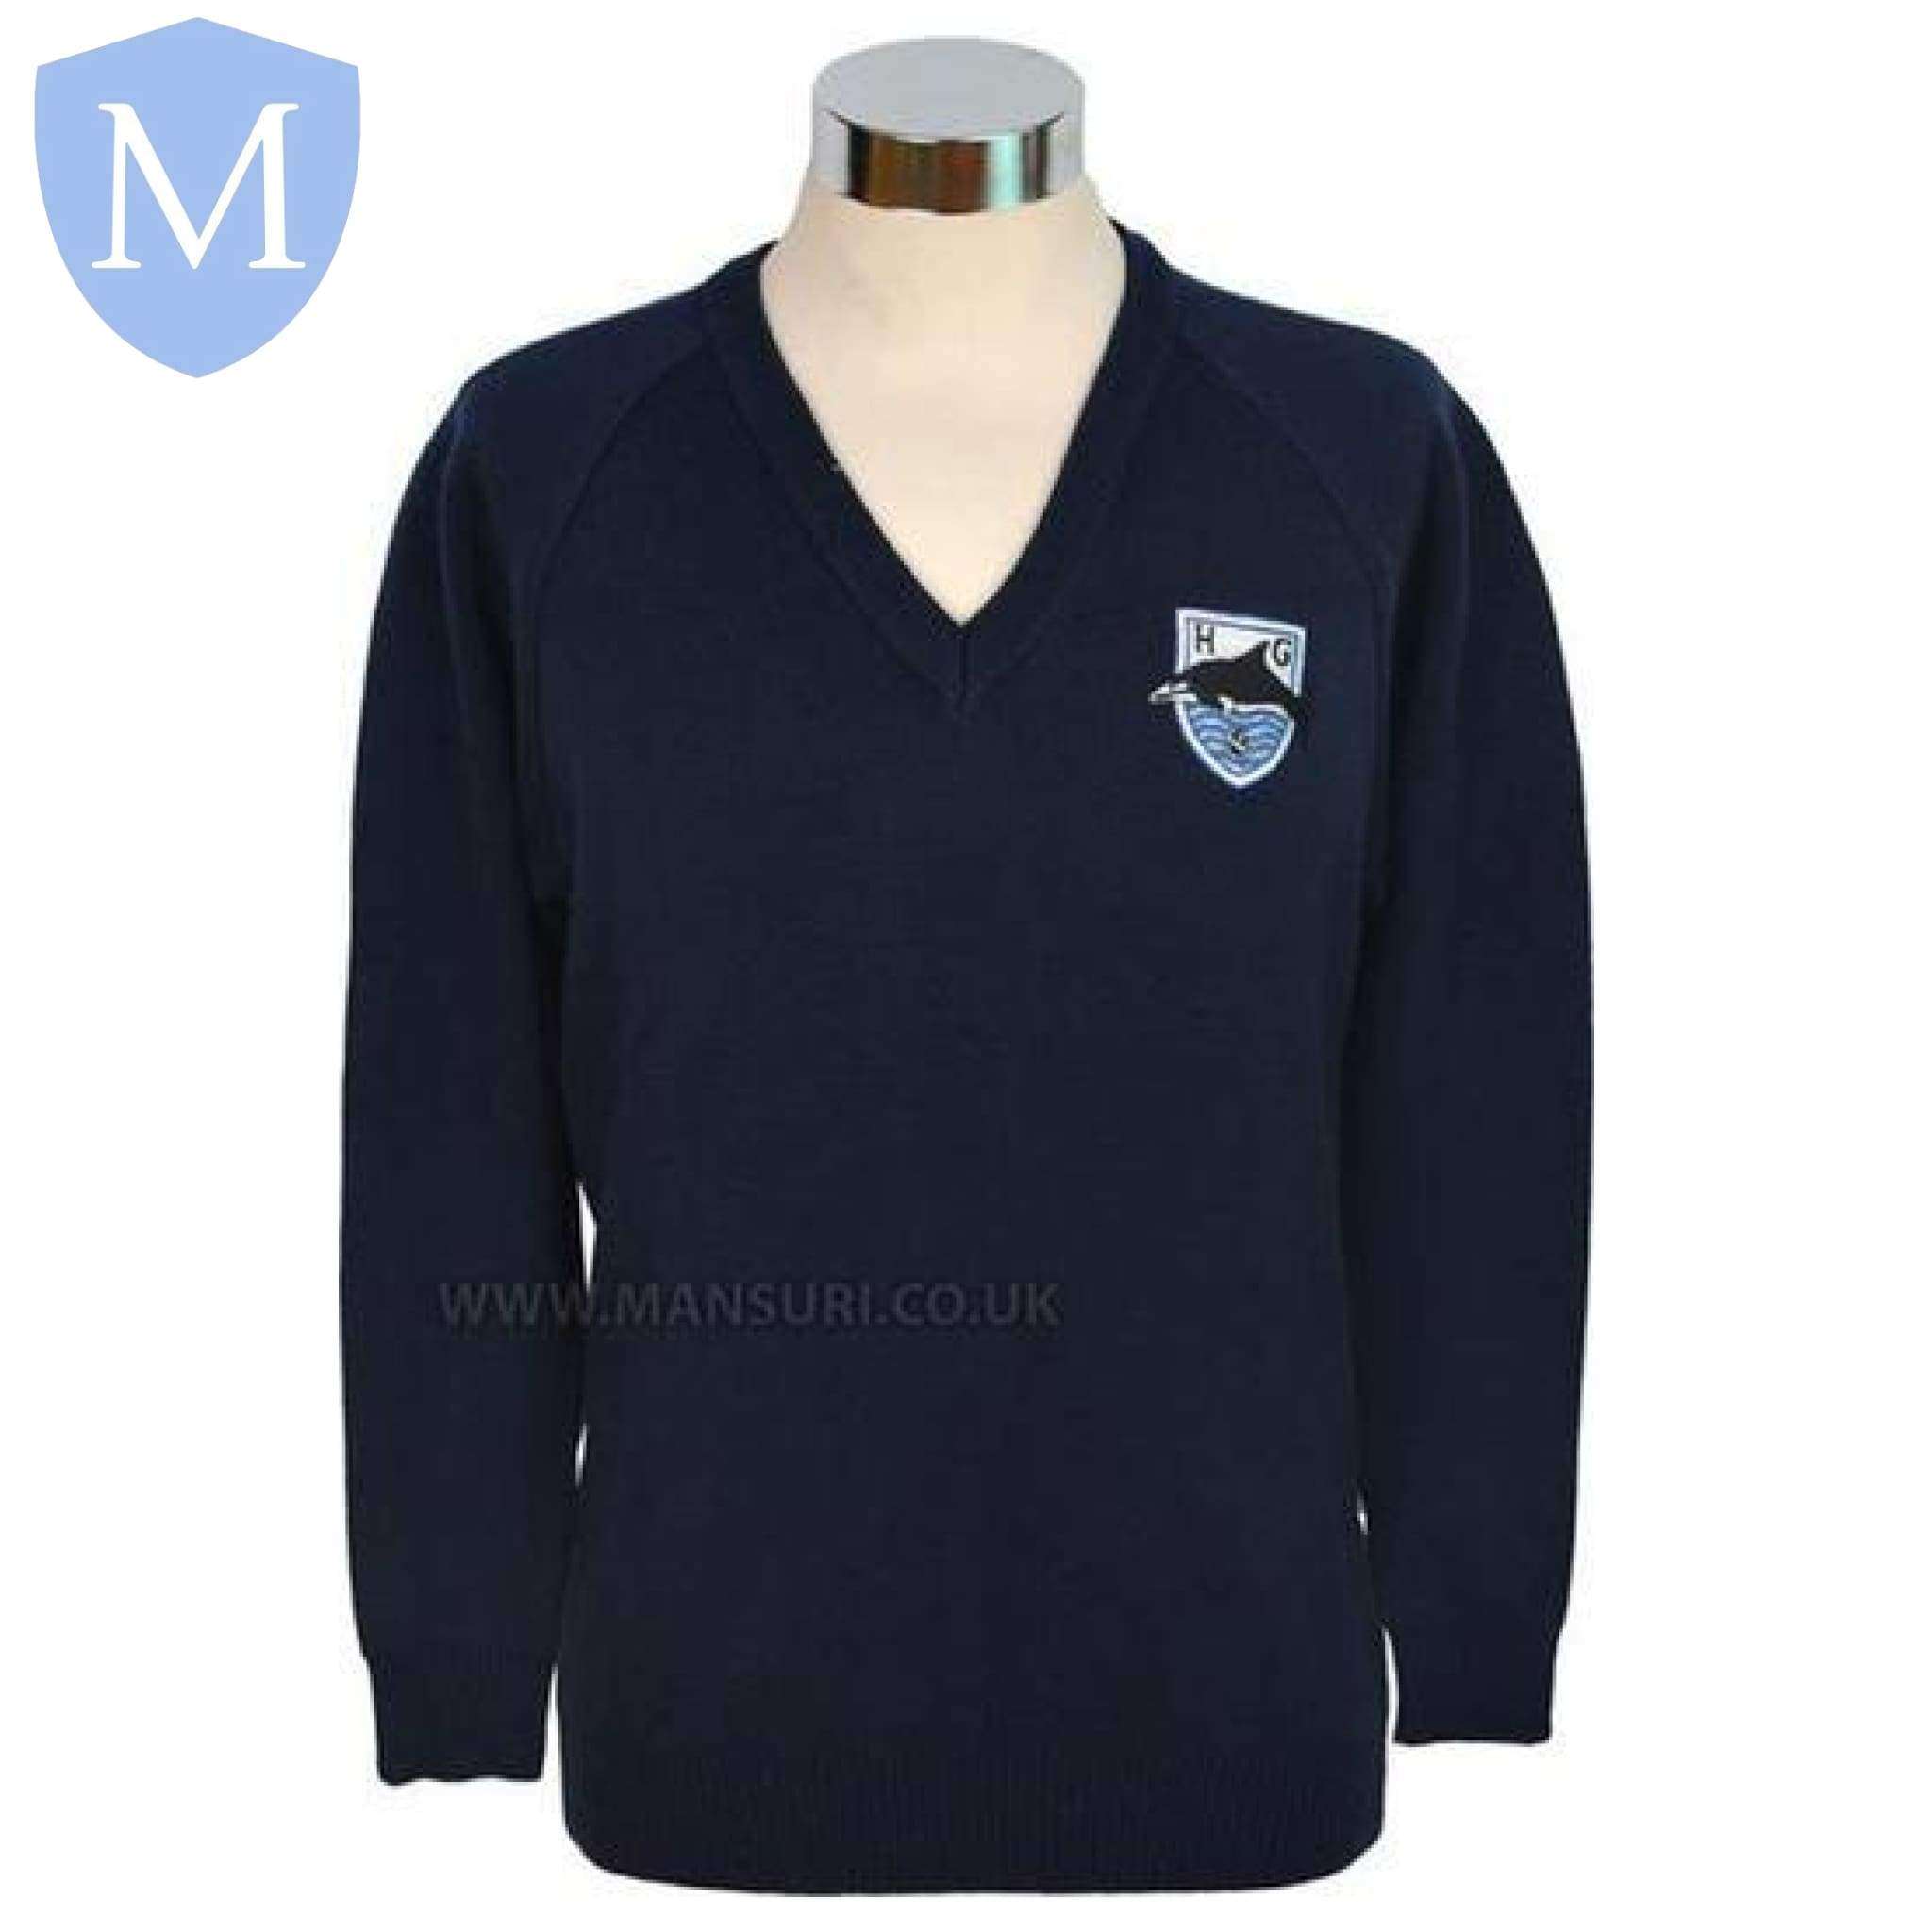 Hall Green Secondary V Neck Jumper Chest 28 (9/10 Years),Chest 30 (9/10 Years),Chest 32 (12 Years),Chest 34 (13 Years),Chest 36 (14 Years),Chest 38 (15/16 Years),Chest 40,Chest 42,Chest 46,Chest 48,Chest 50,Chest 52